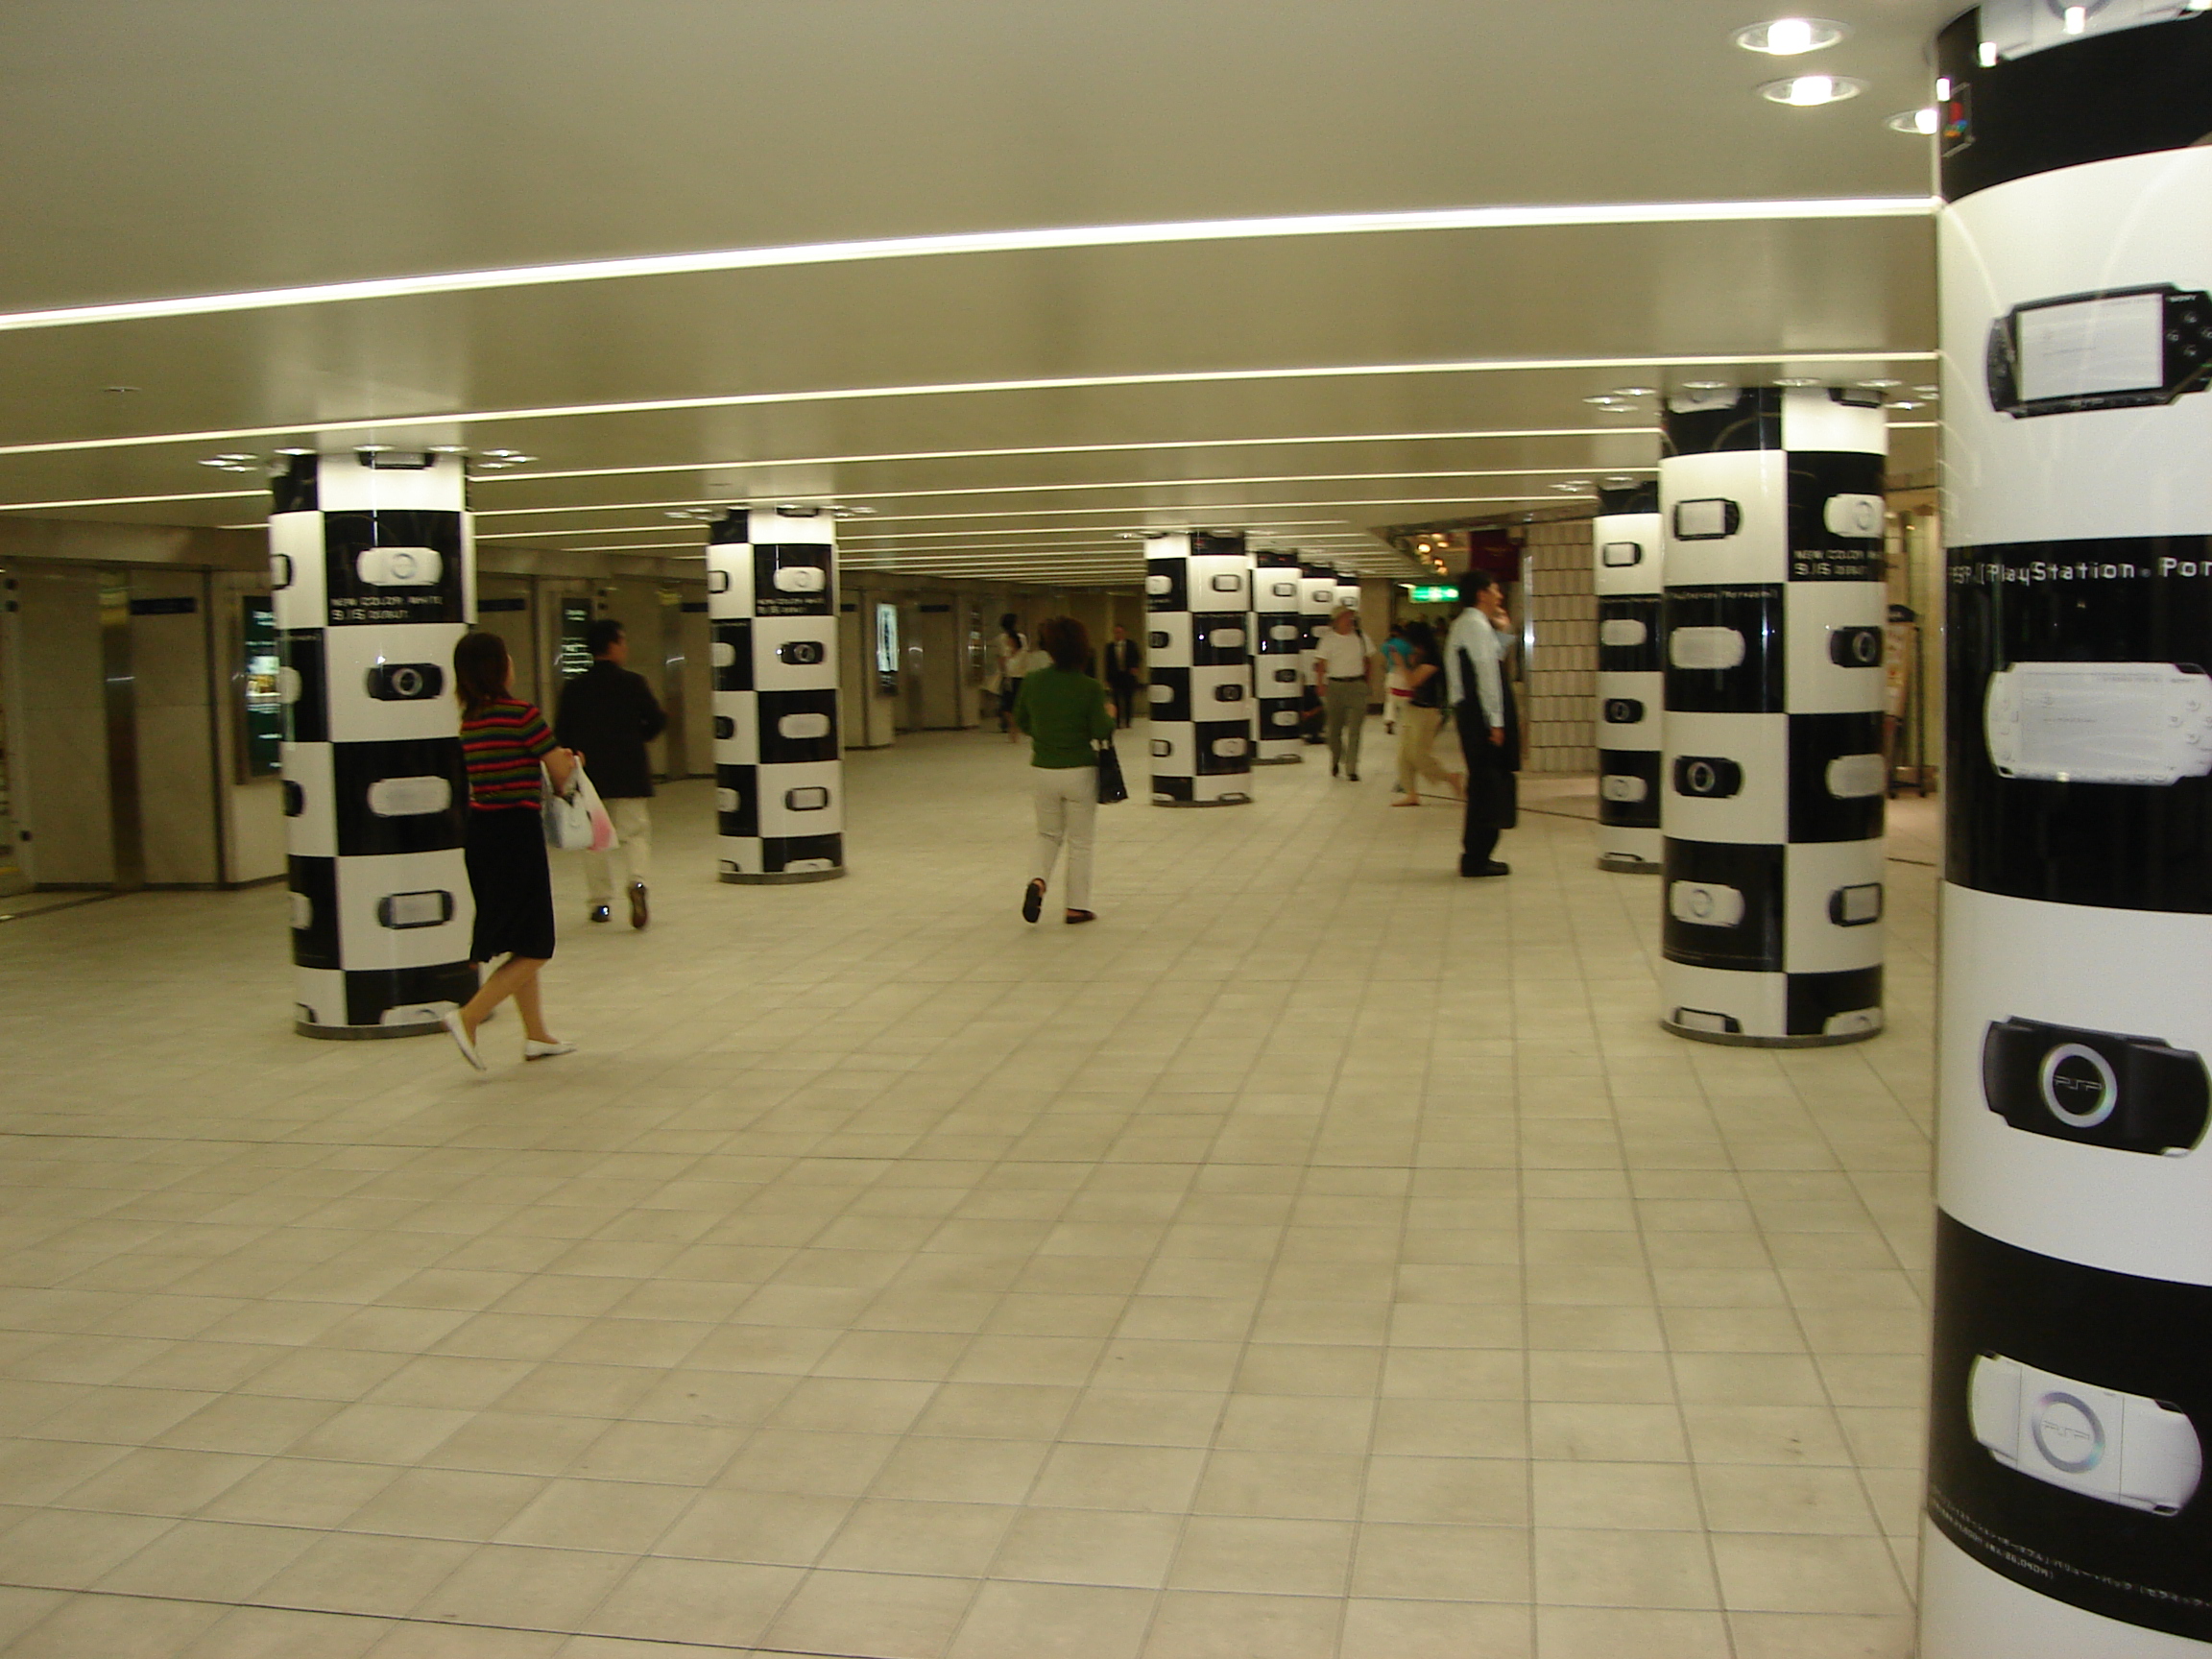 pillars in a subway station are wrapped in repeating images of the playstation portable